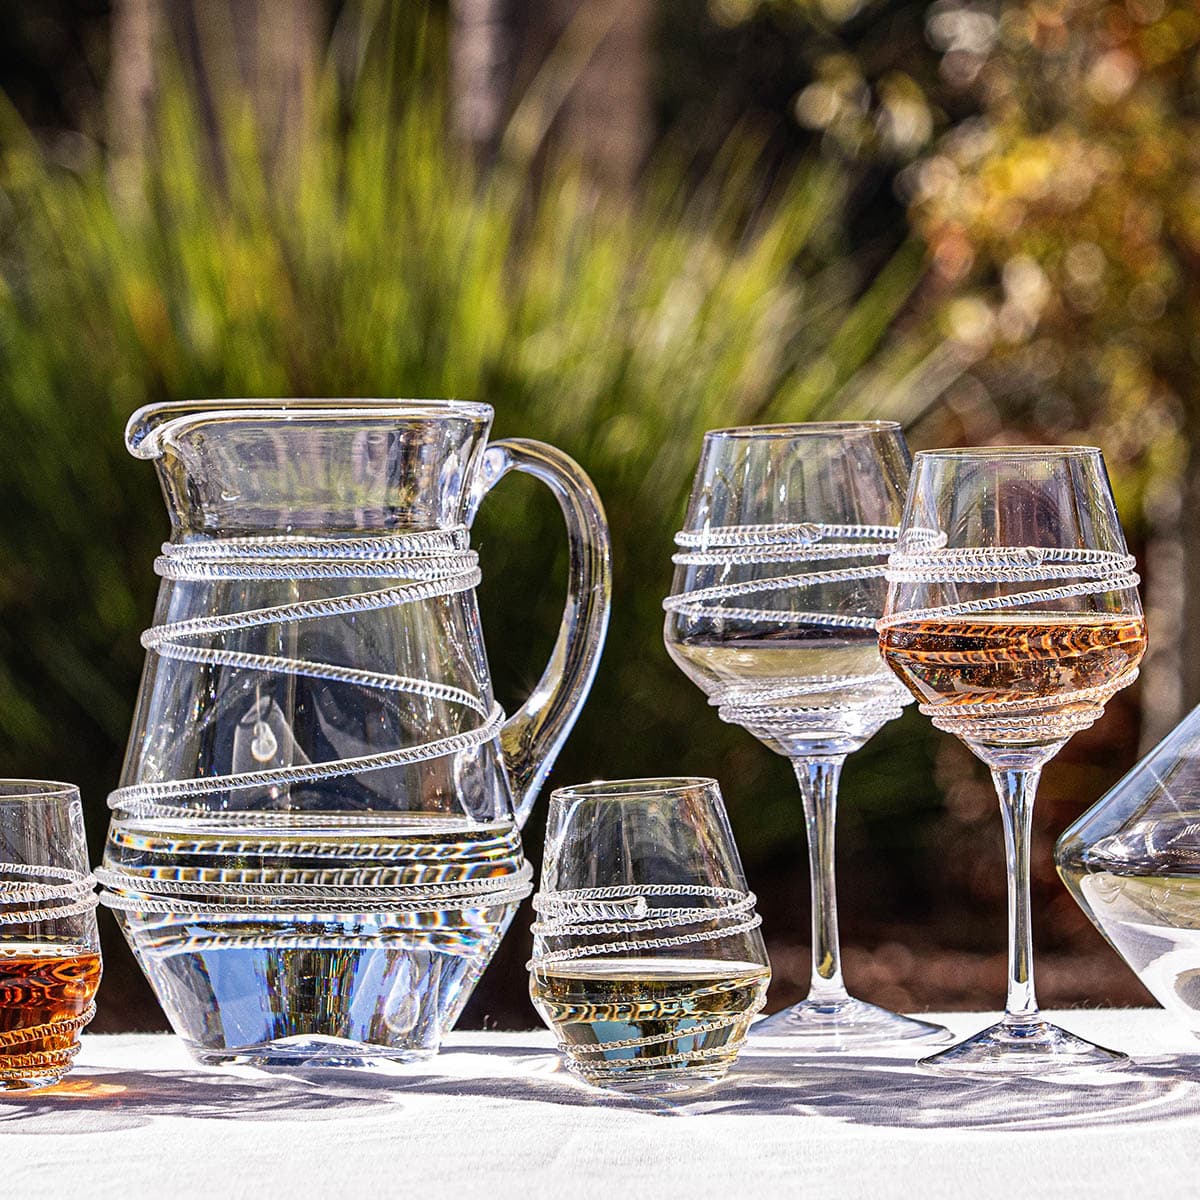 Drinkware Collections: Drinking Glasses & Drink Serveware